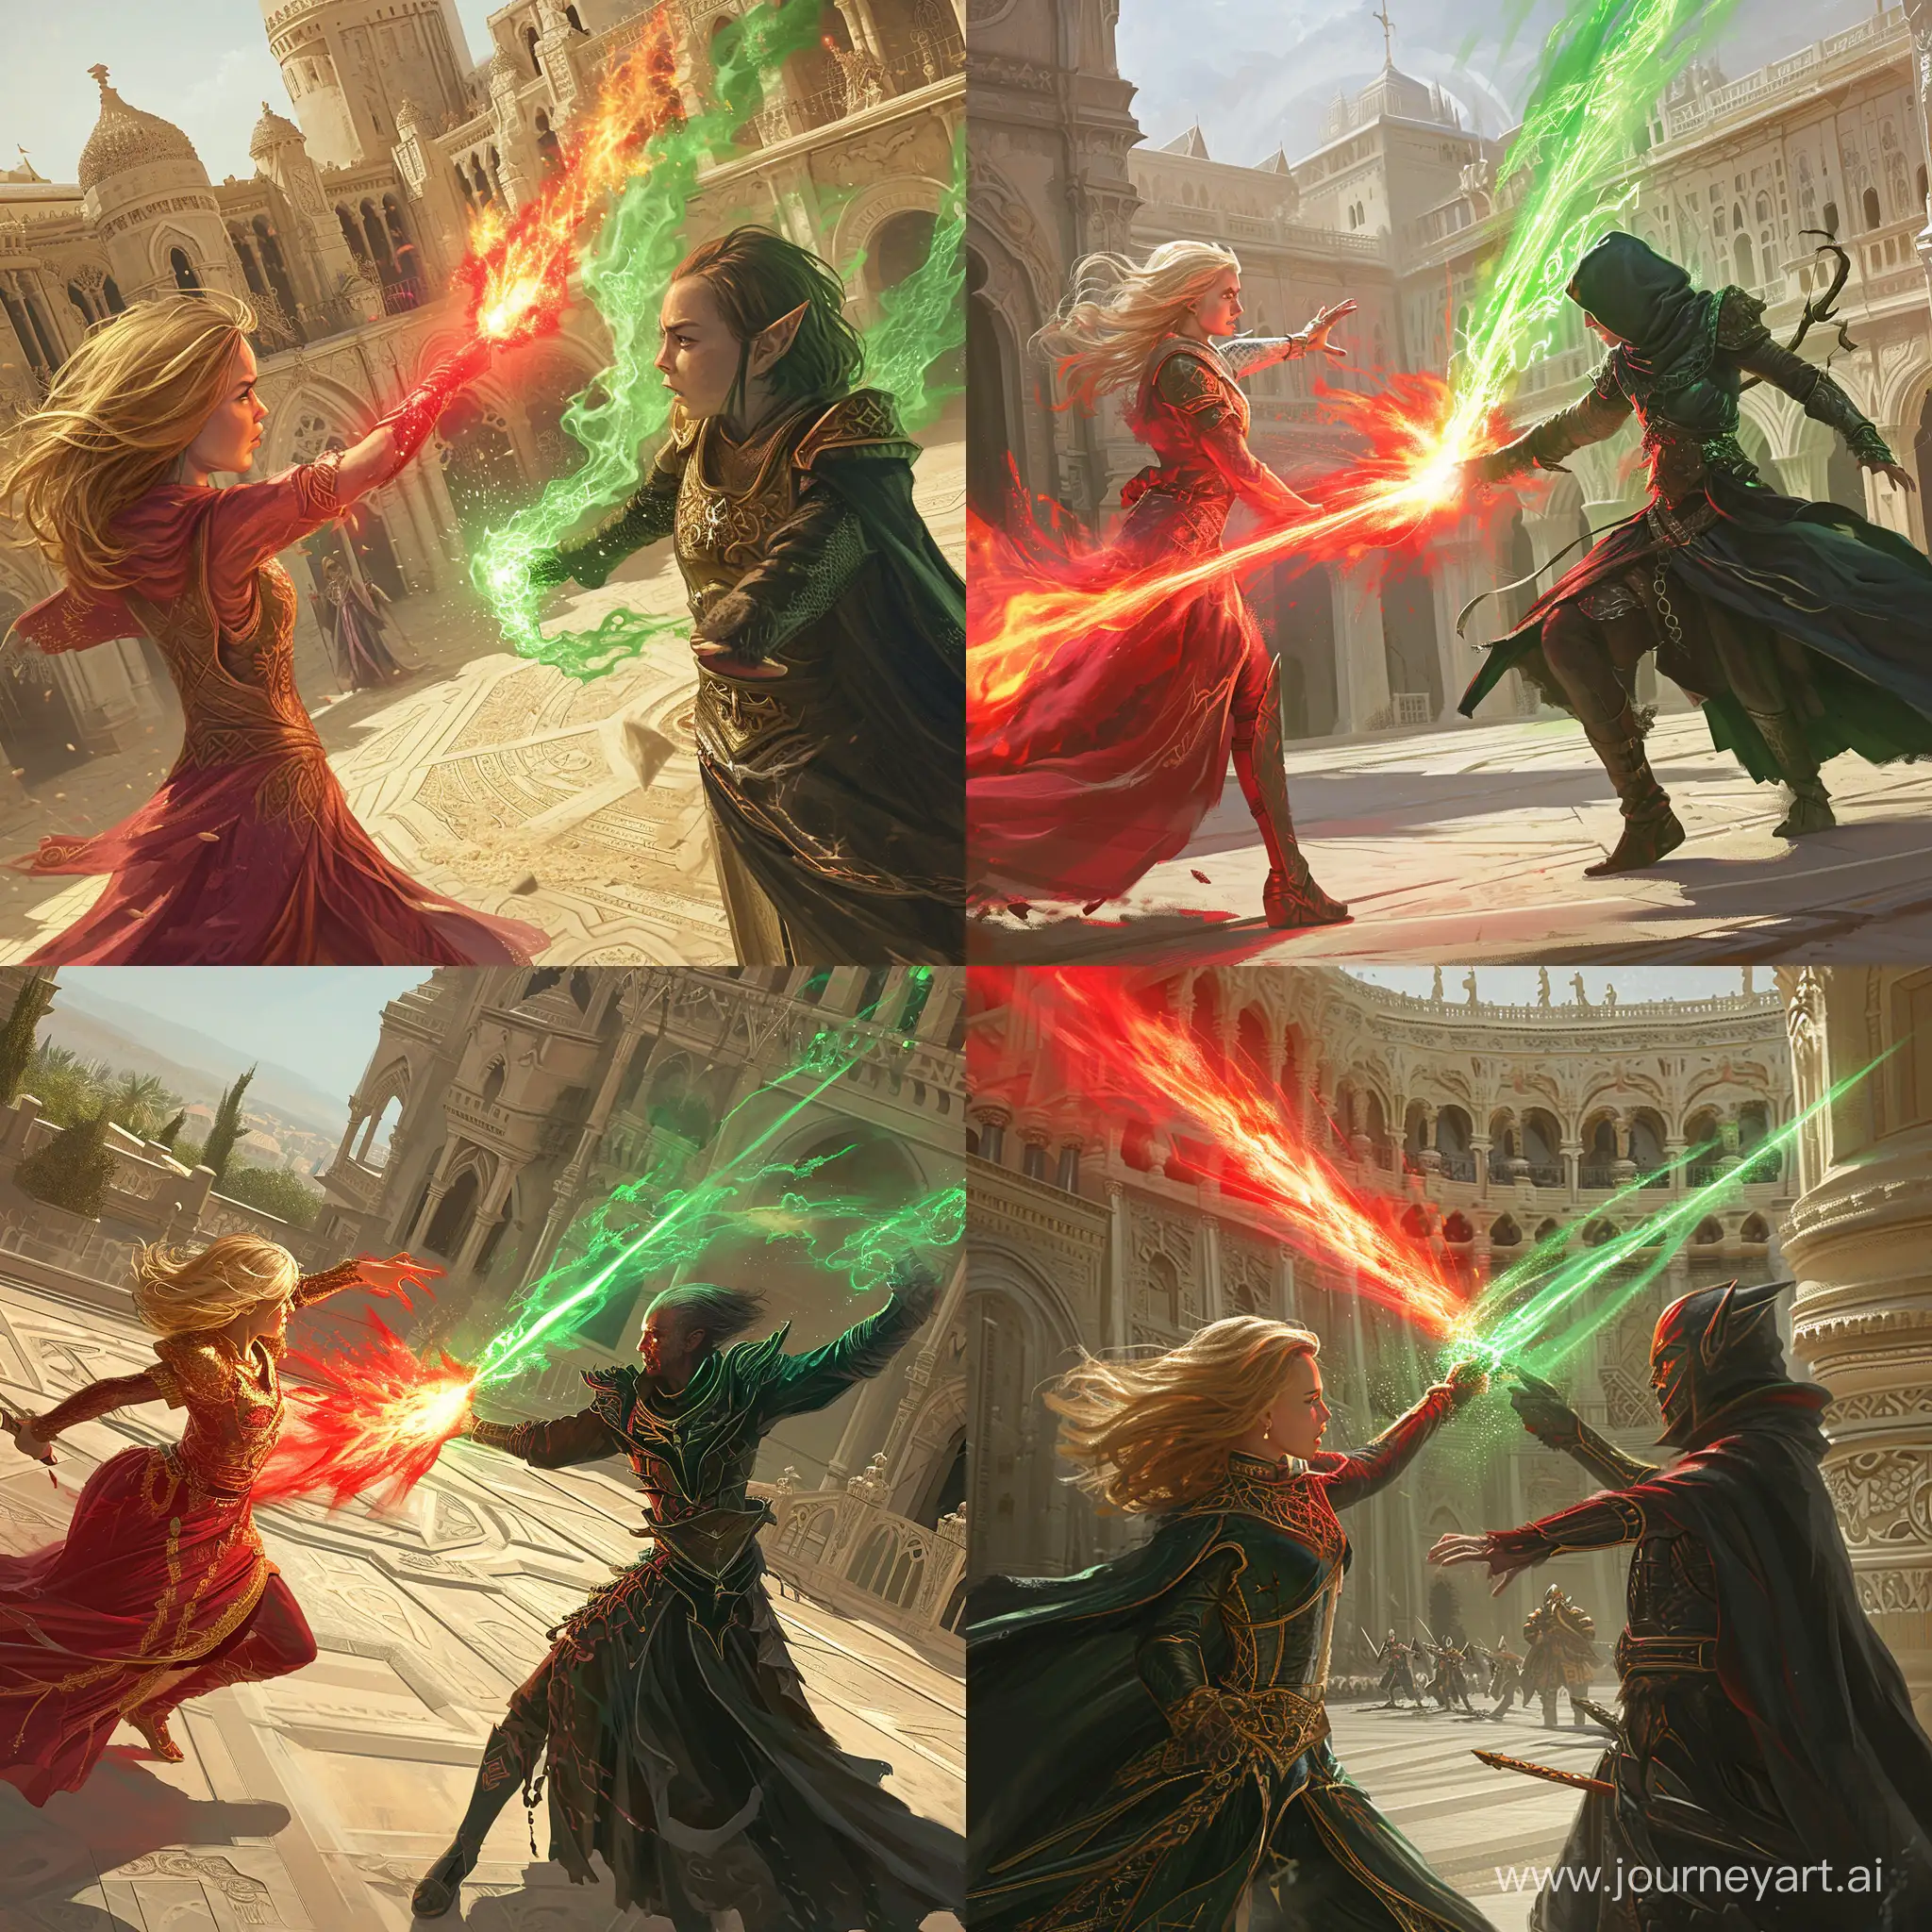 battle-mage princess with chin-length blonde hair, channelling a red fire spell at a dark wizard, the wizard is channelling a green fire spell back at the princess, the two forces meet at a point between them, outdoor ornate arena built of light stone, in the middle of a royal city, photorealistic, highly detailed